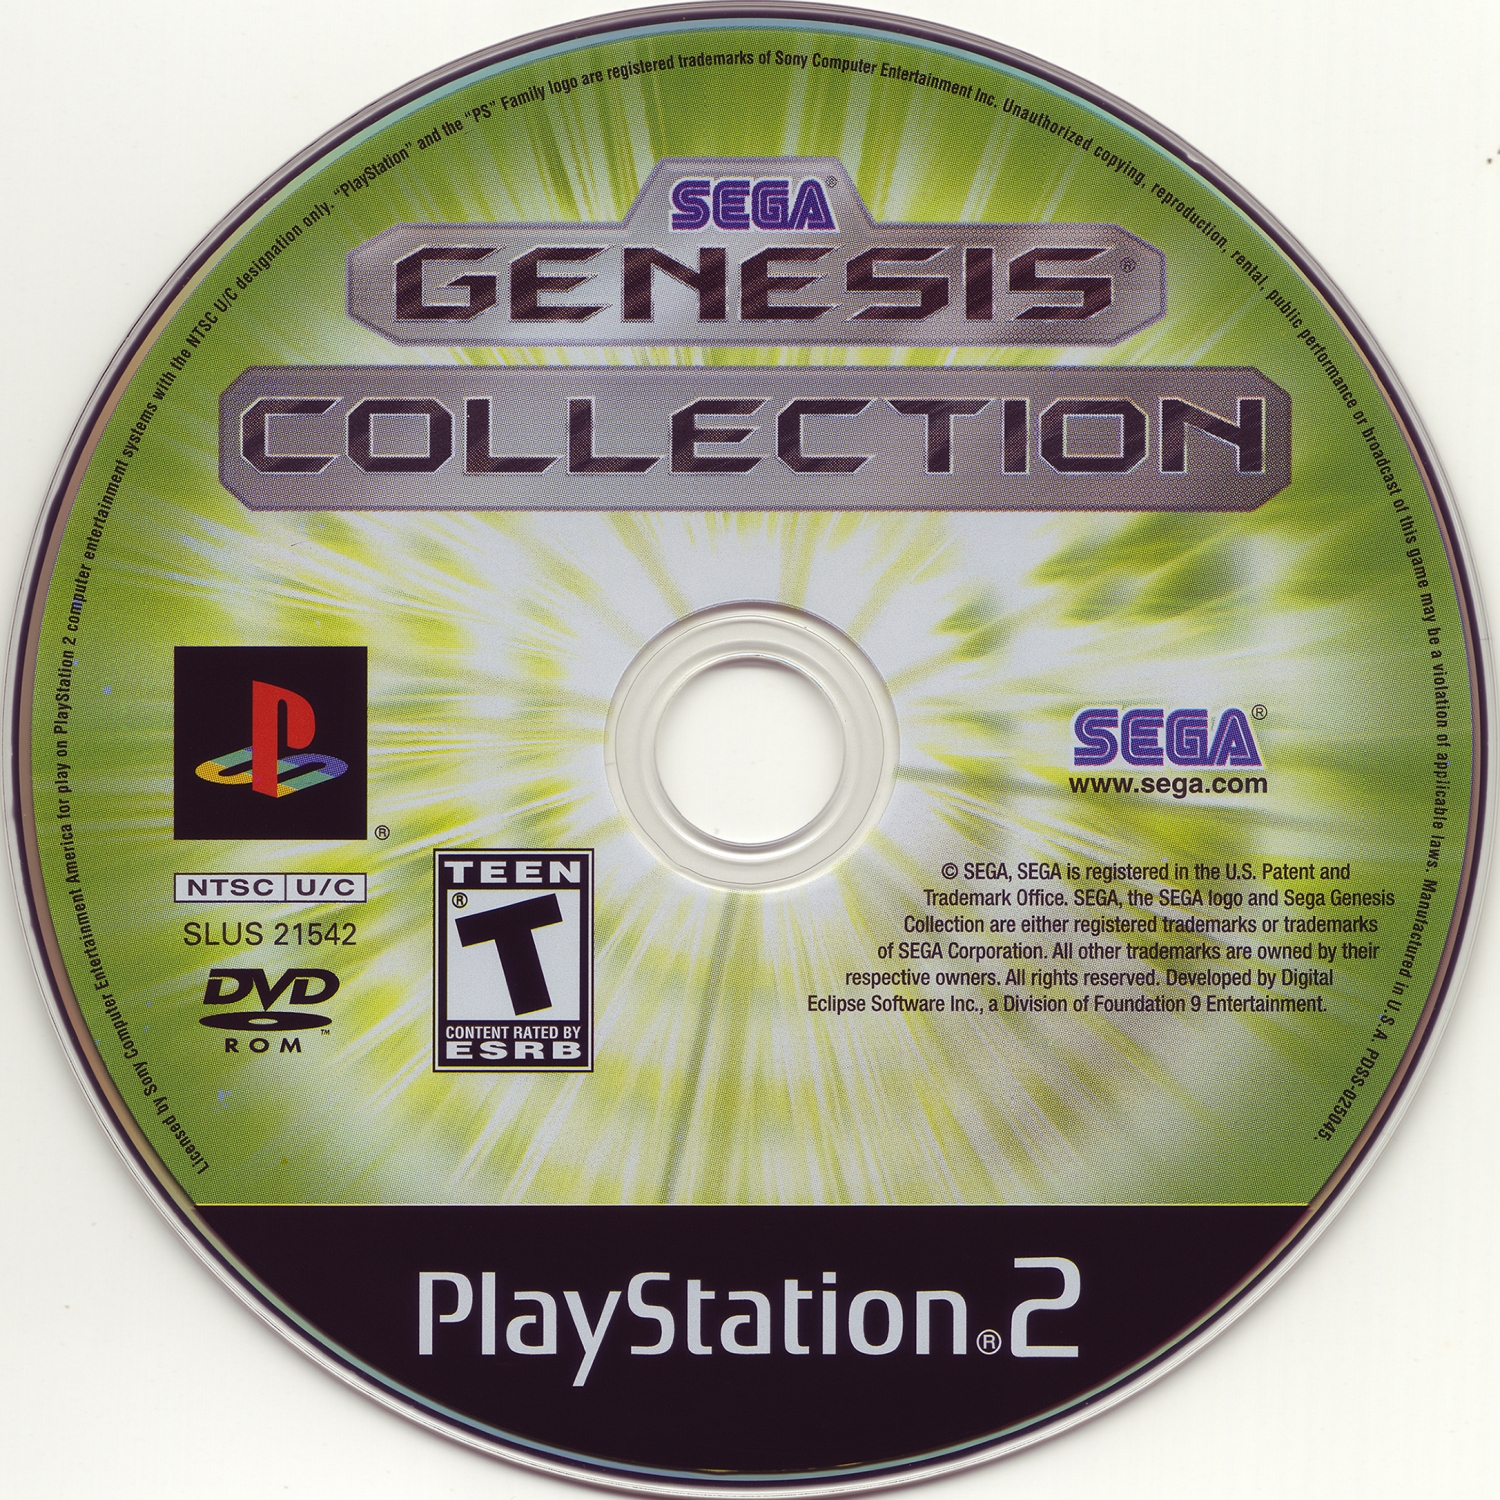 Collection ps2. Sega collection ps2. Sega Mega collection ps2. Sega Classics collection ps2. Sega Mega Drive collection ps2.